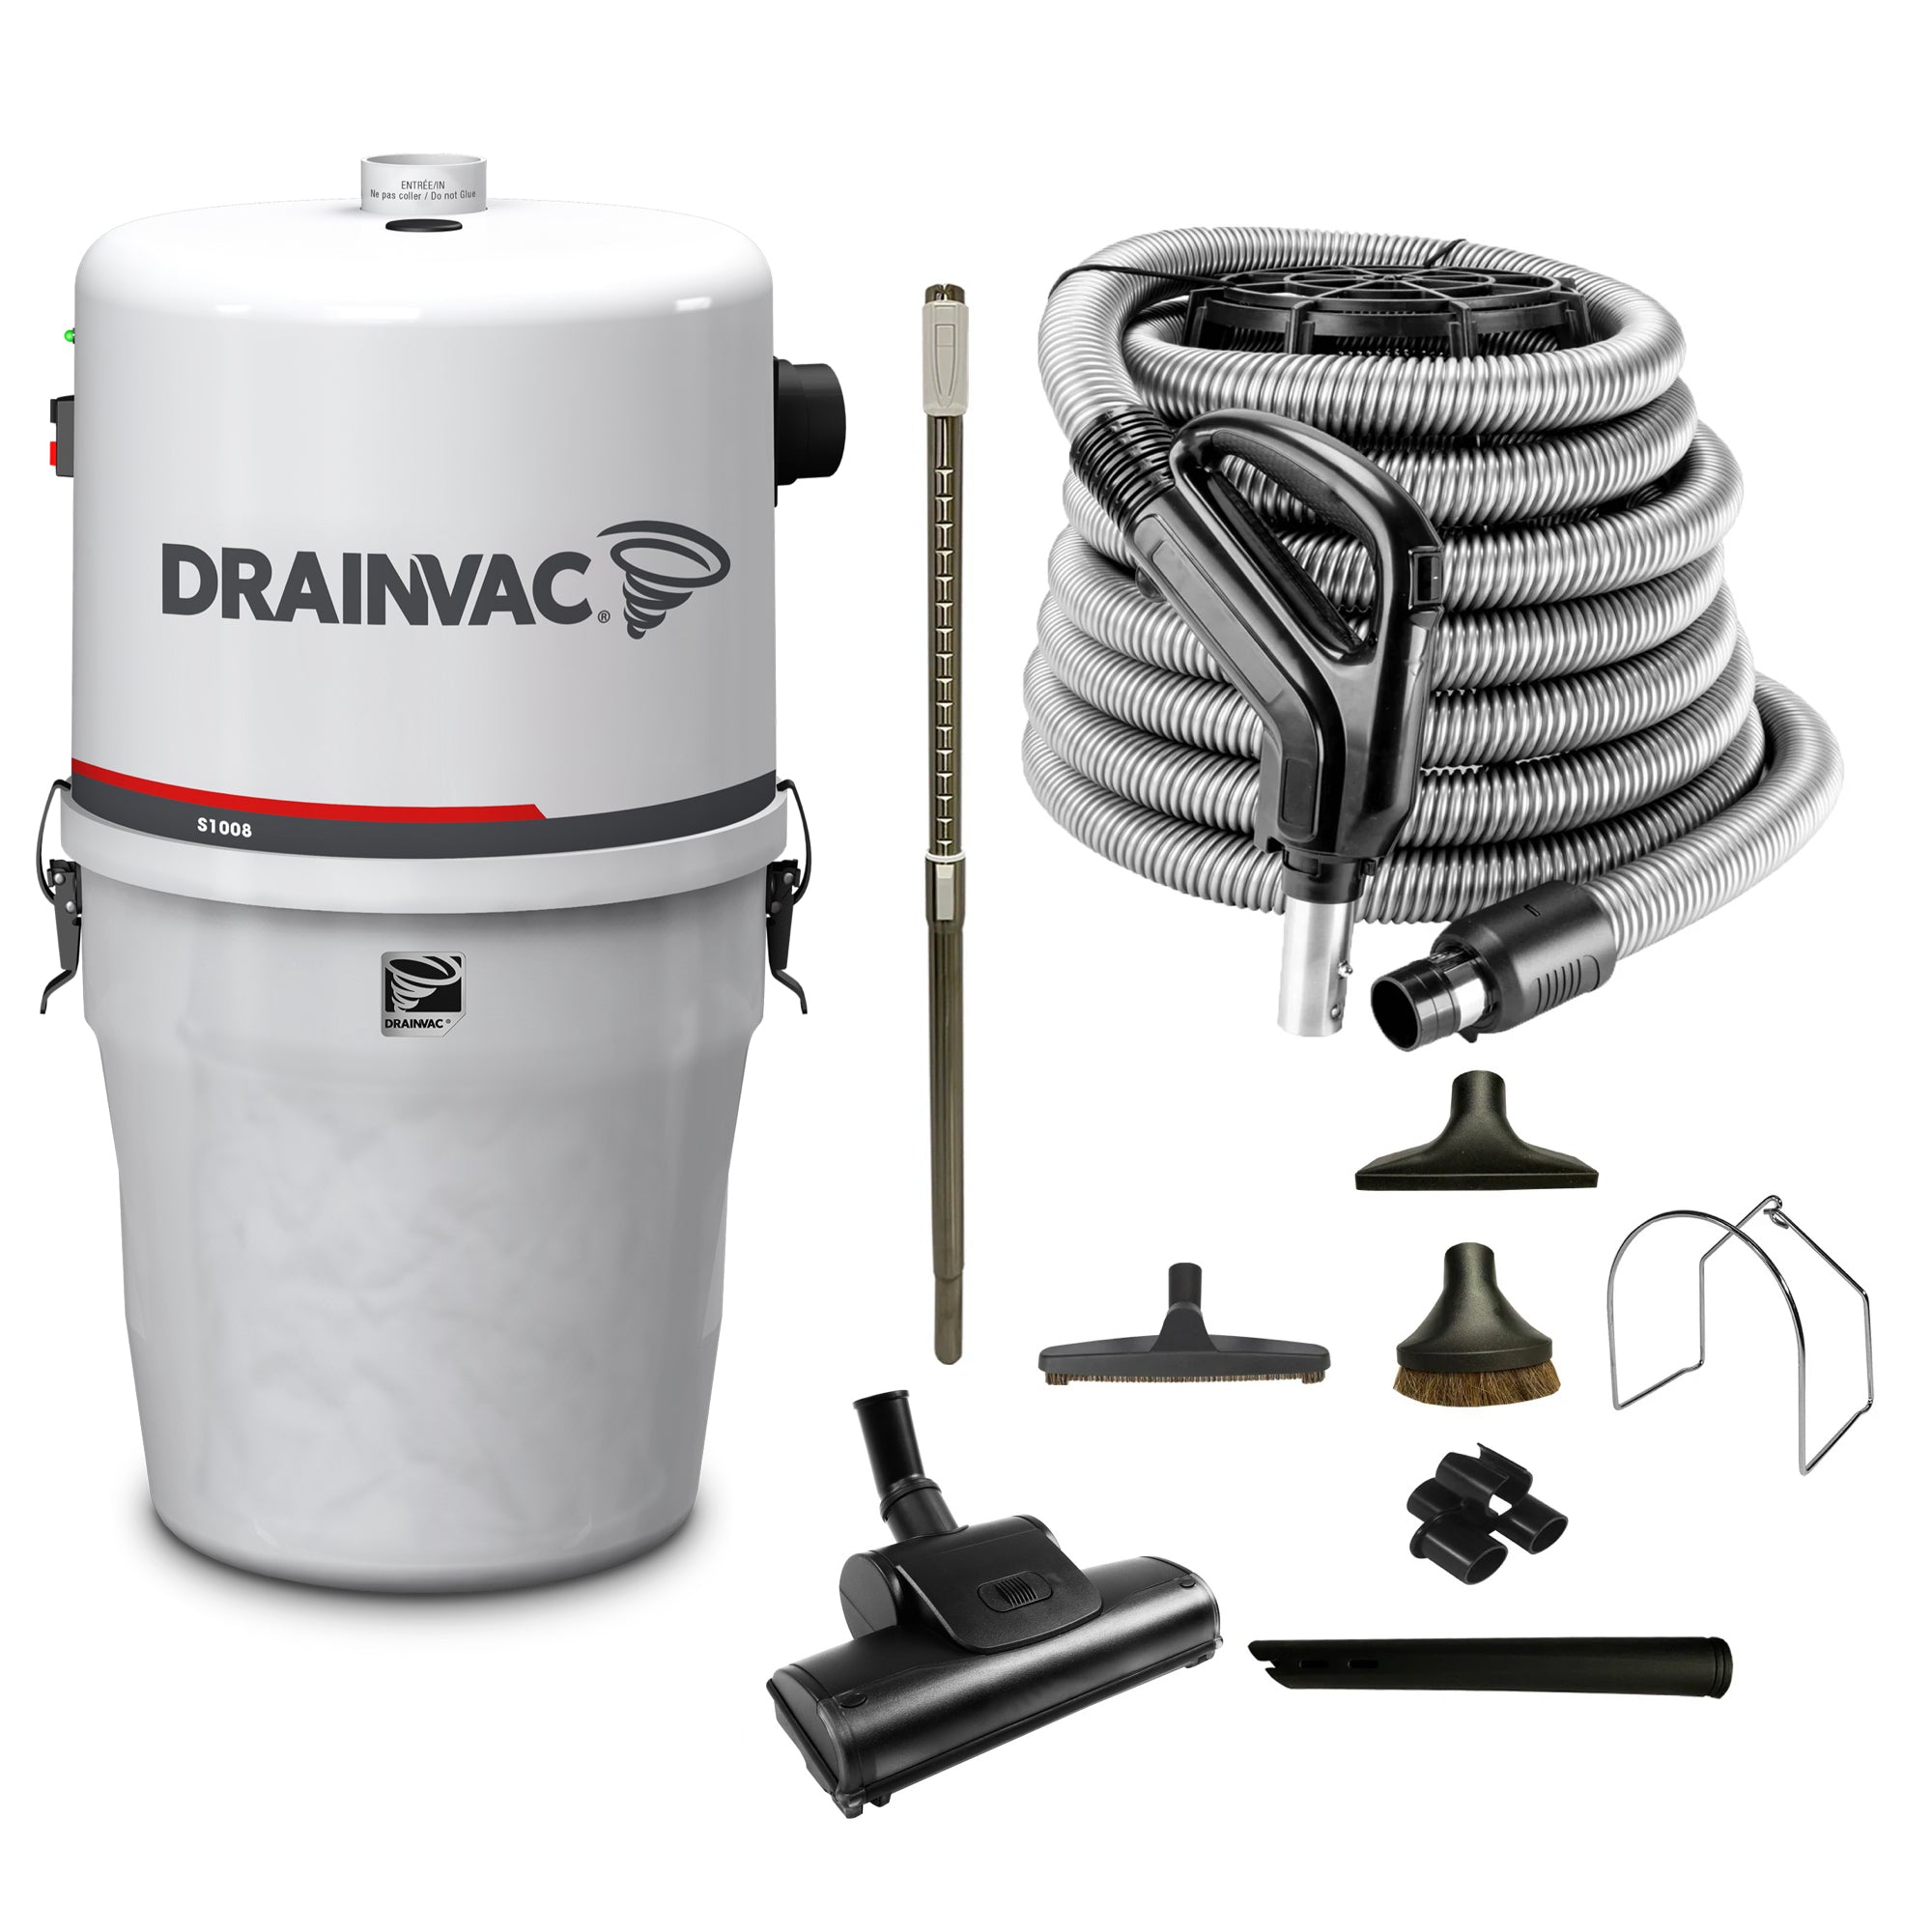 DrainVac S1008 Central Vacuum Cleaner with Deluxe Air Package